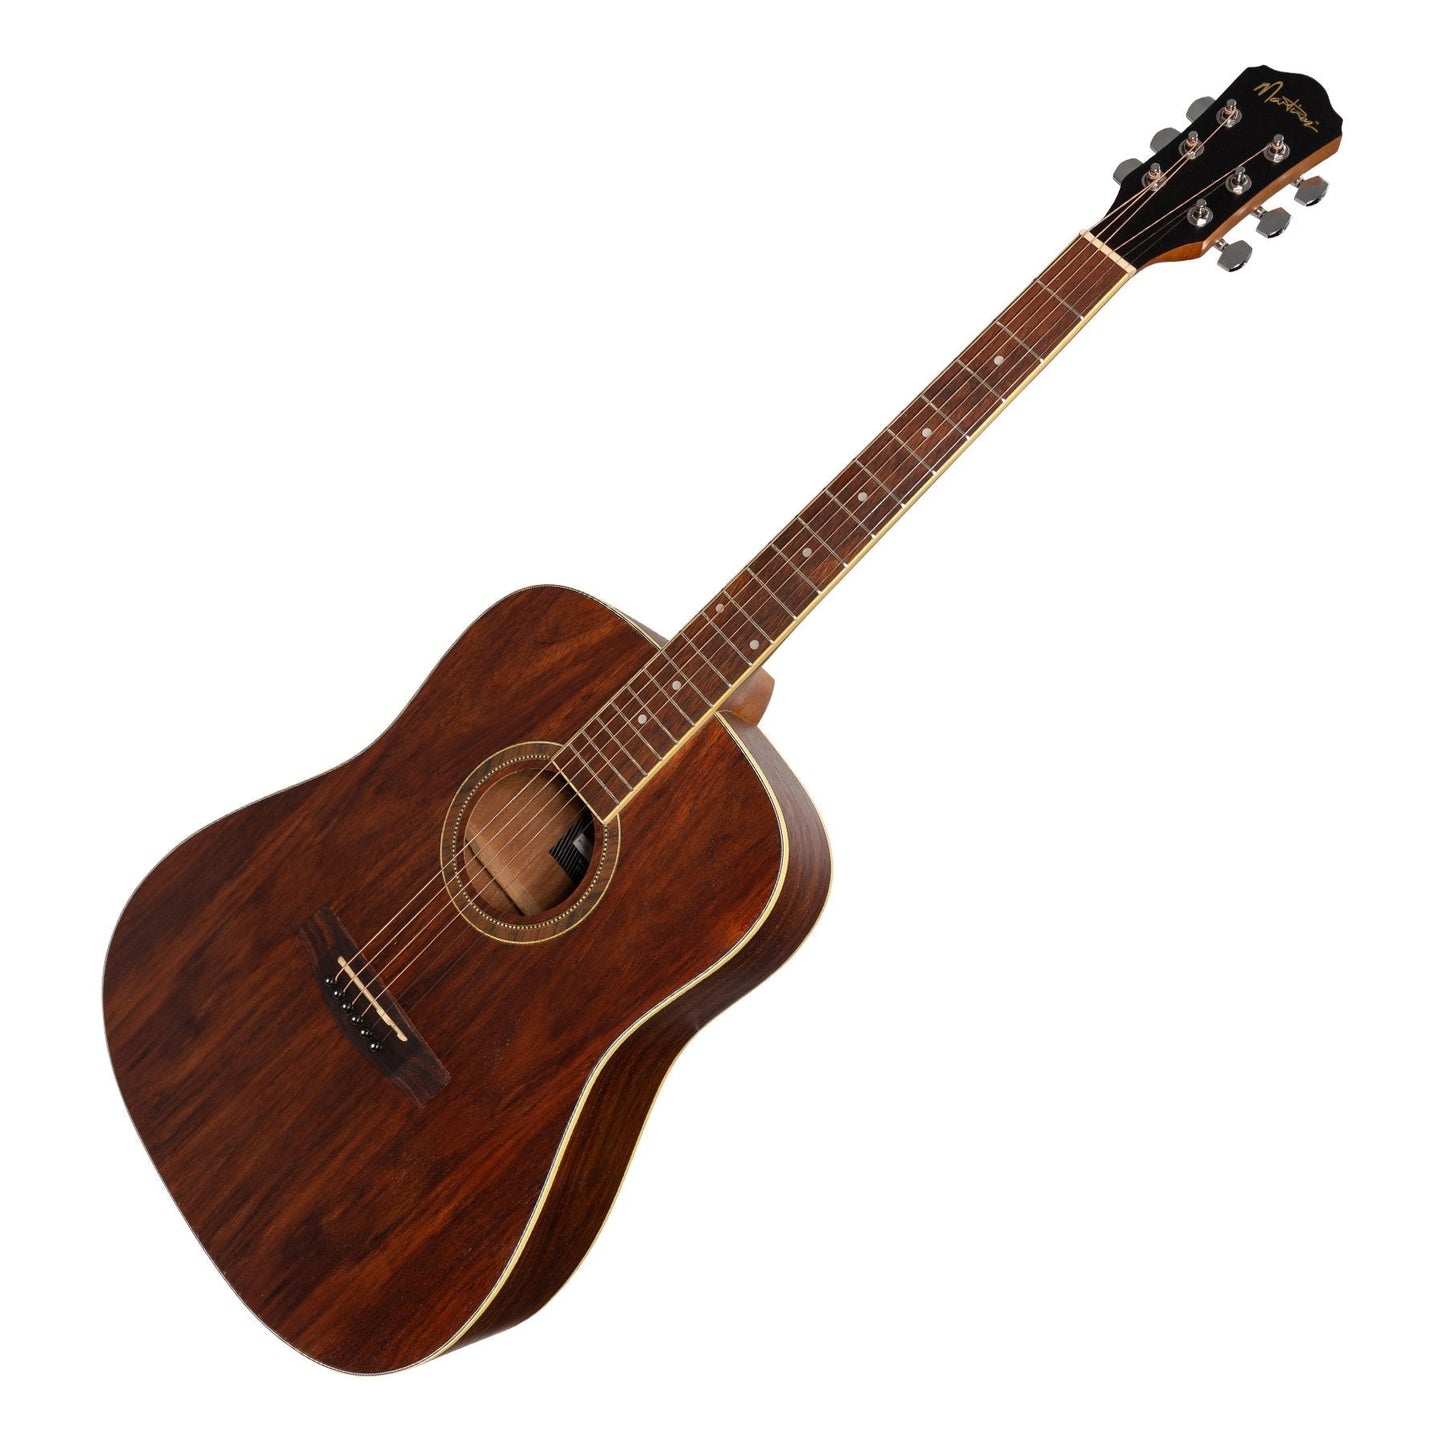 Martinez '41 Series' Dreadnought Acoustic Guitar with Built-in Tuner (Rosewood)